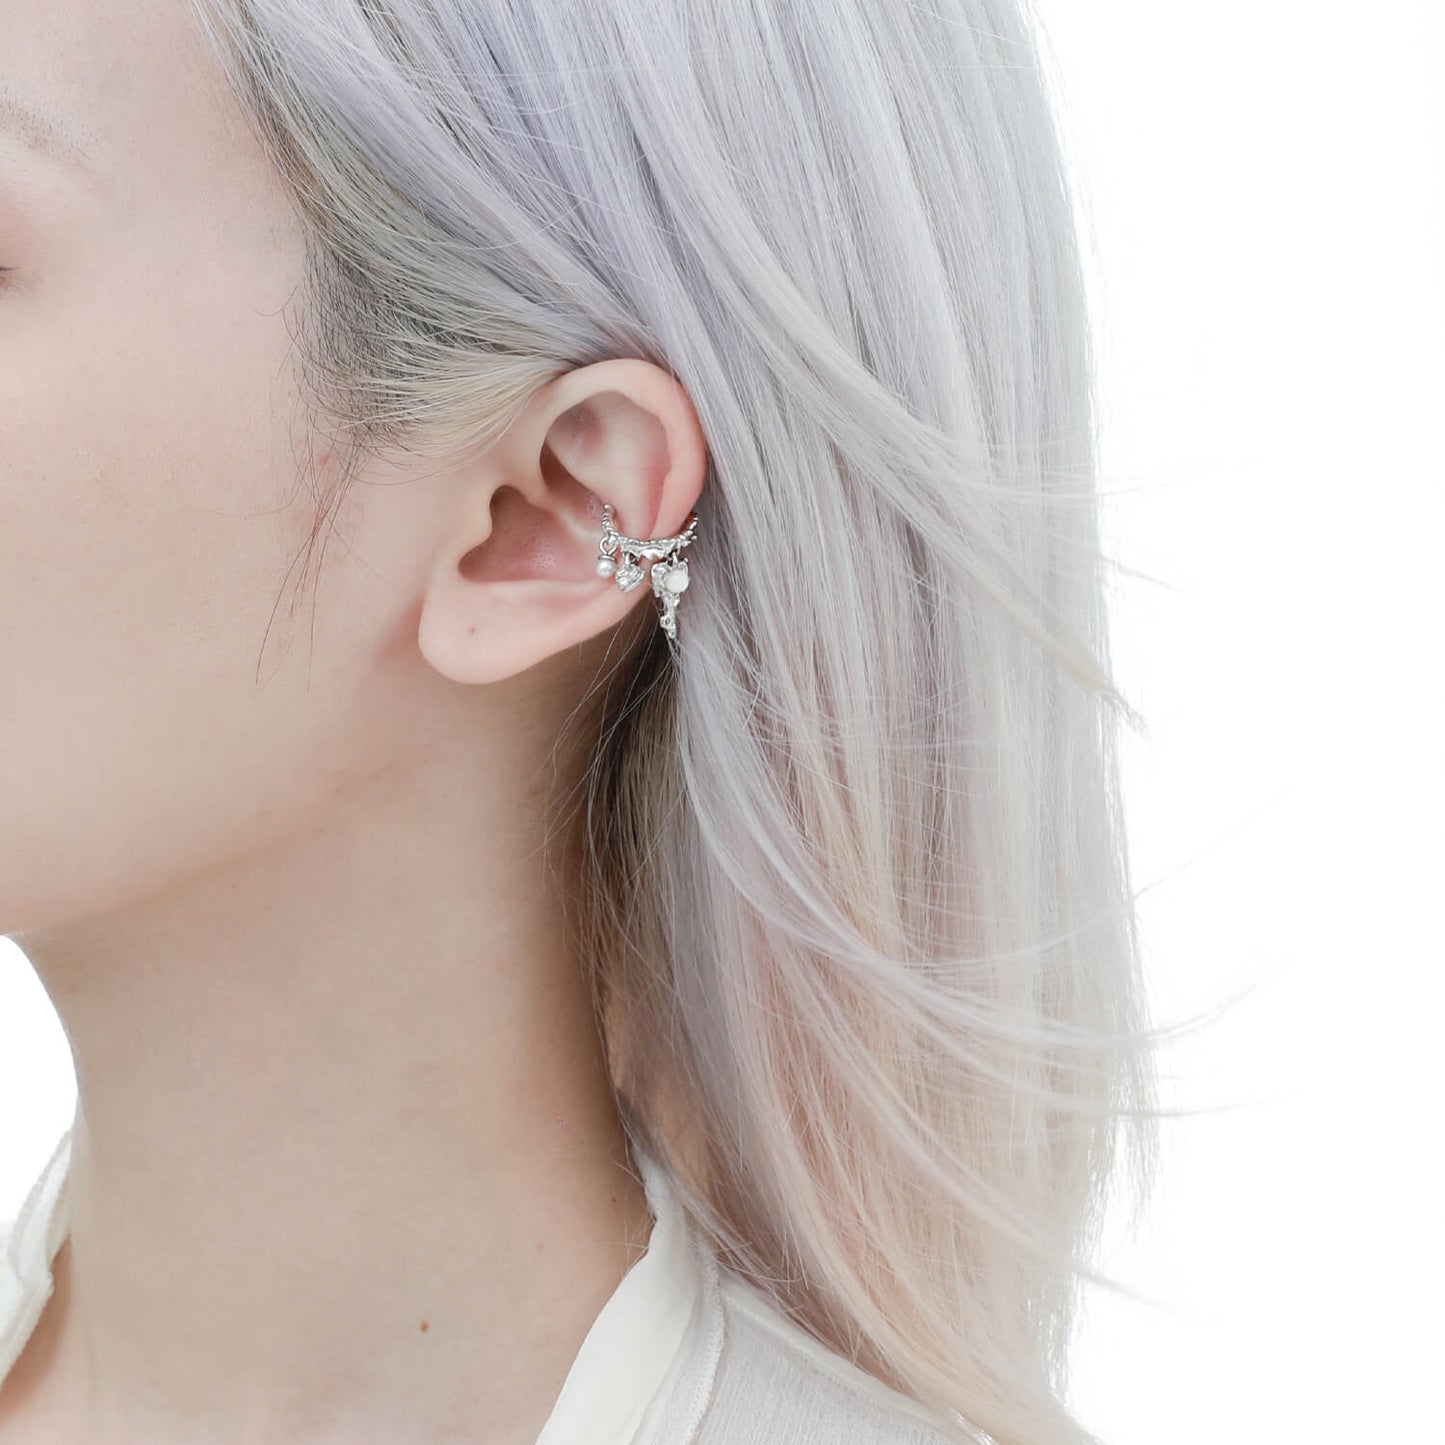 Embrace the charm of unique jewelry with these ear clips. The irregular round circles hold a trio of dainty pendants, including a delicate lock, a heart, and a lustrous pearl. The combination of these minuscule yet detailed elements adds an air of sophistication to your look.